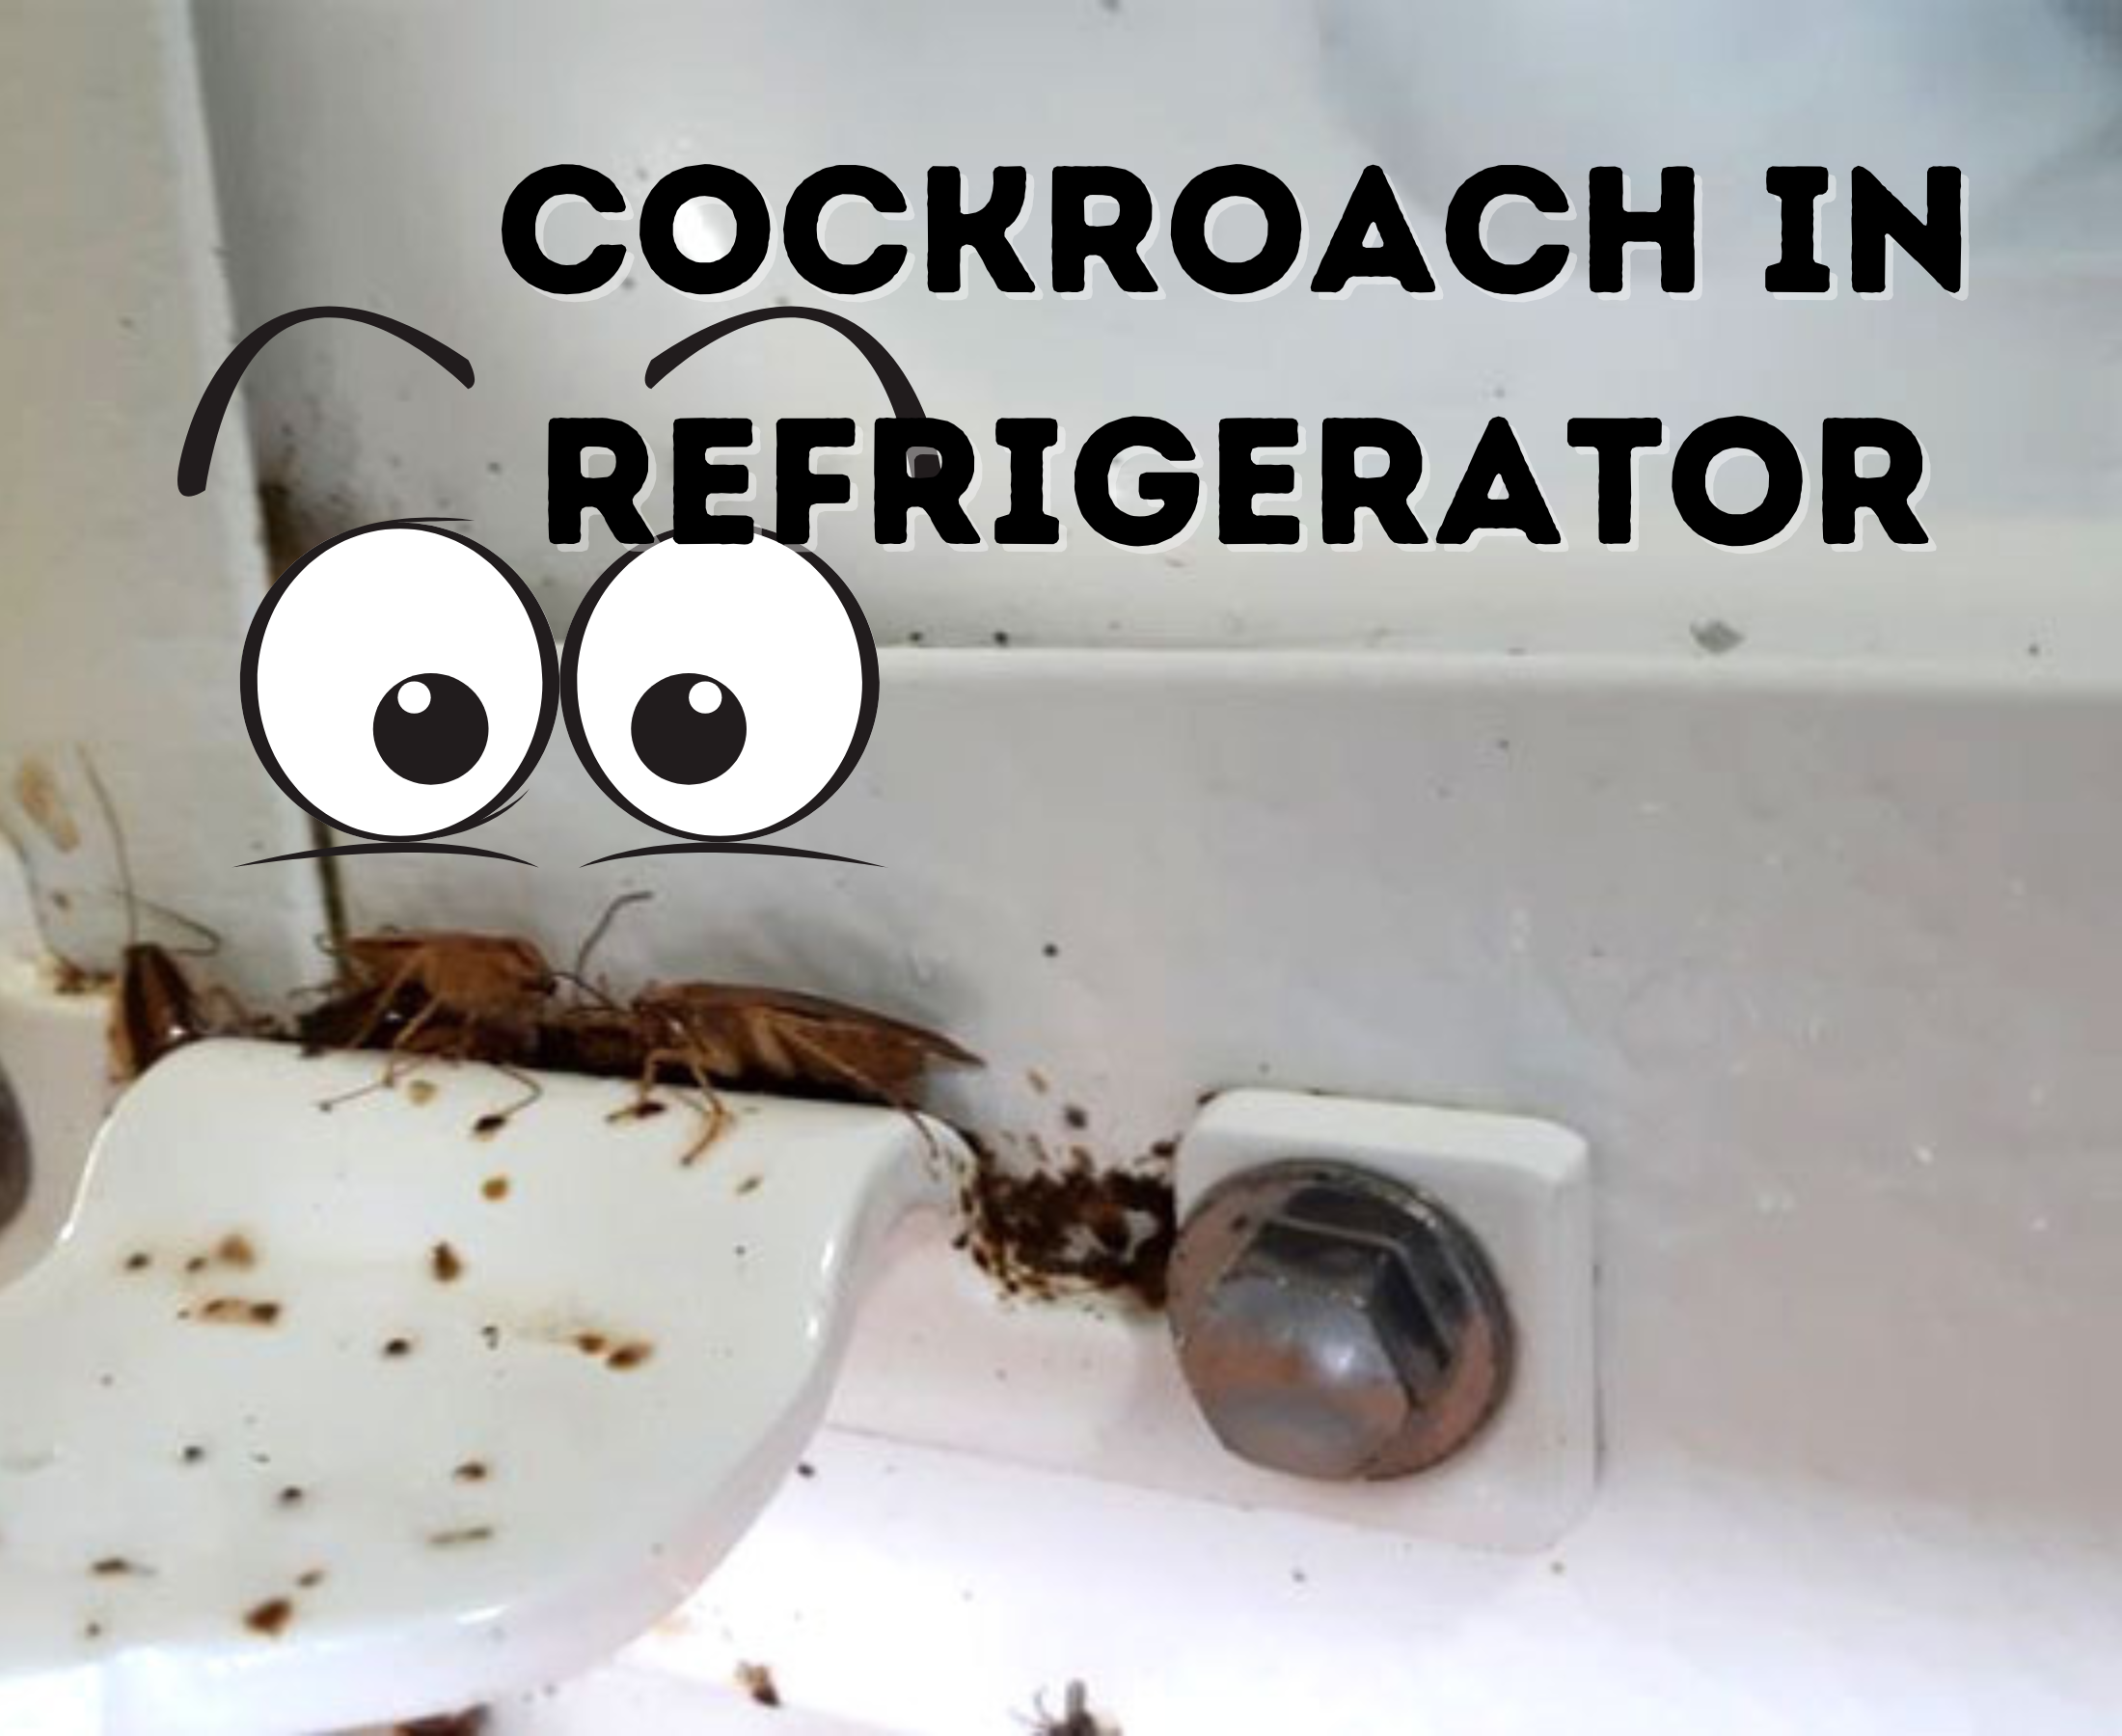 How to remove roaches from the refrigerator?